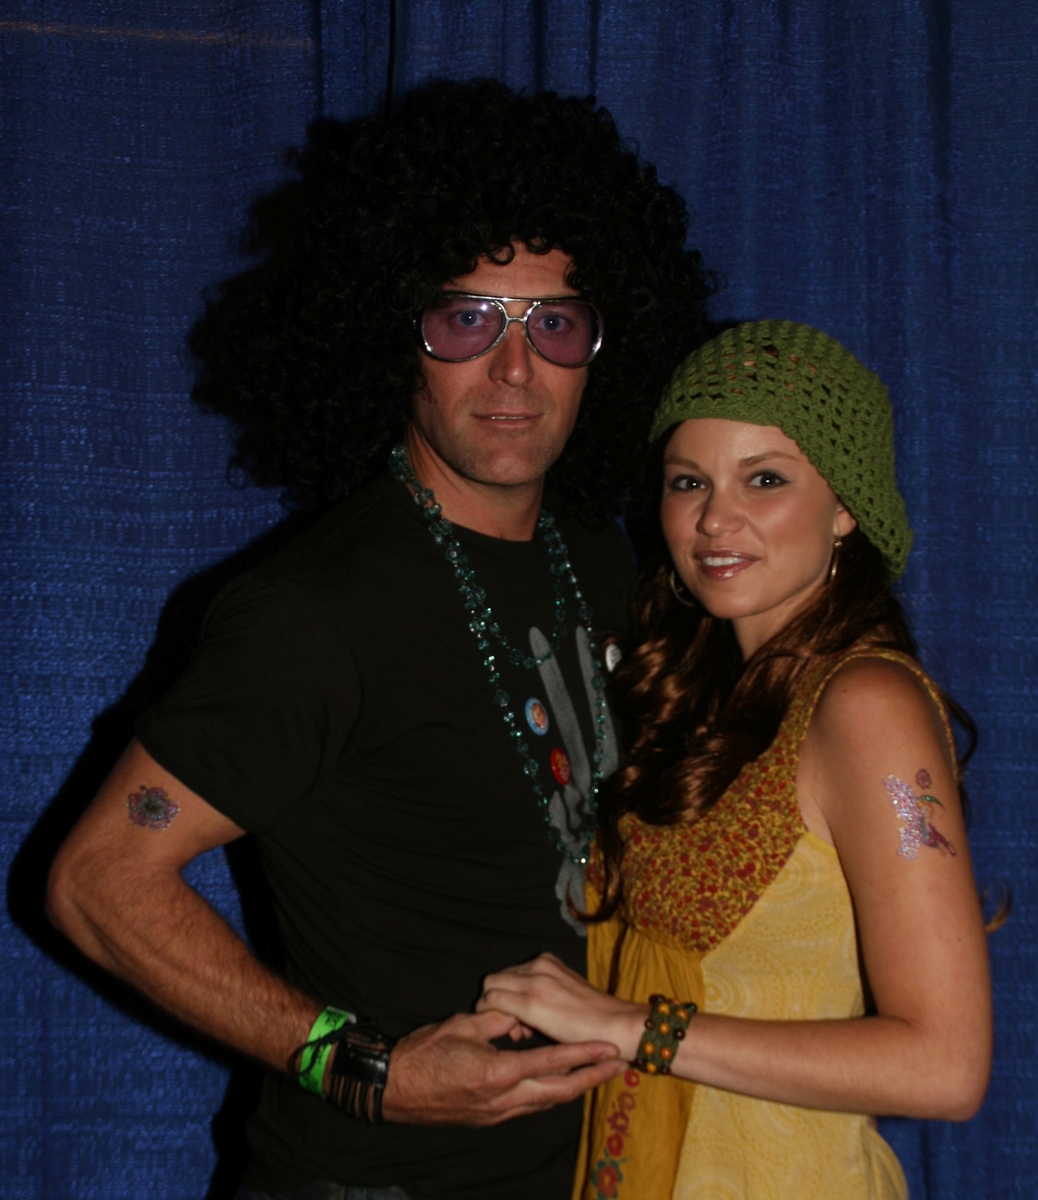 Robert Bogue and Mandy Bruno at the Rock Show for Charity to benefit The American Red Cross. NYC (2008)